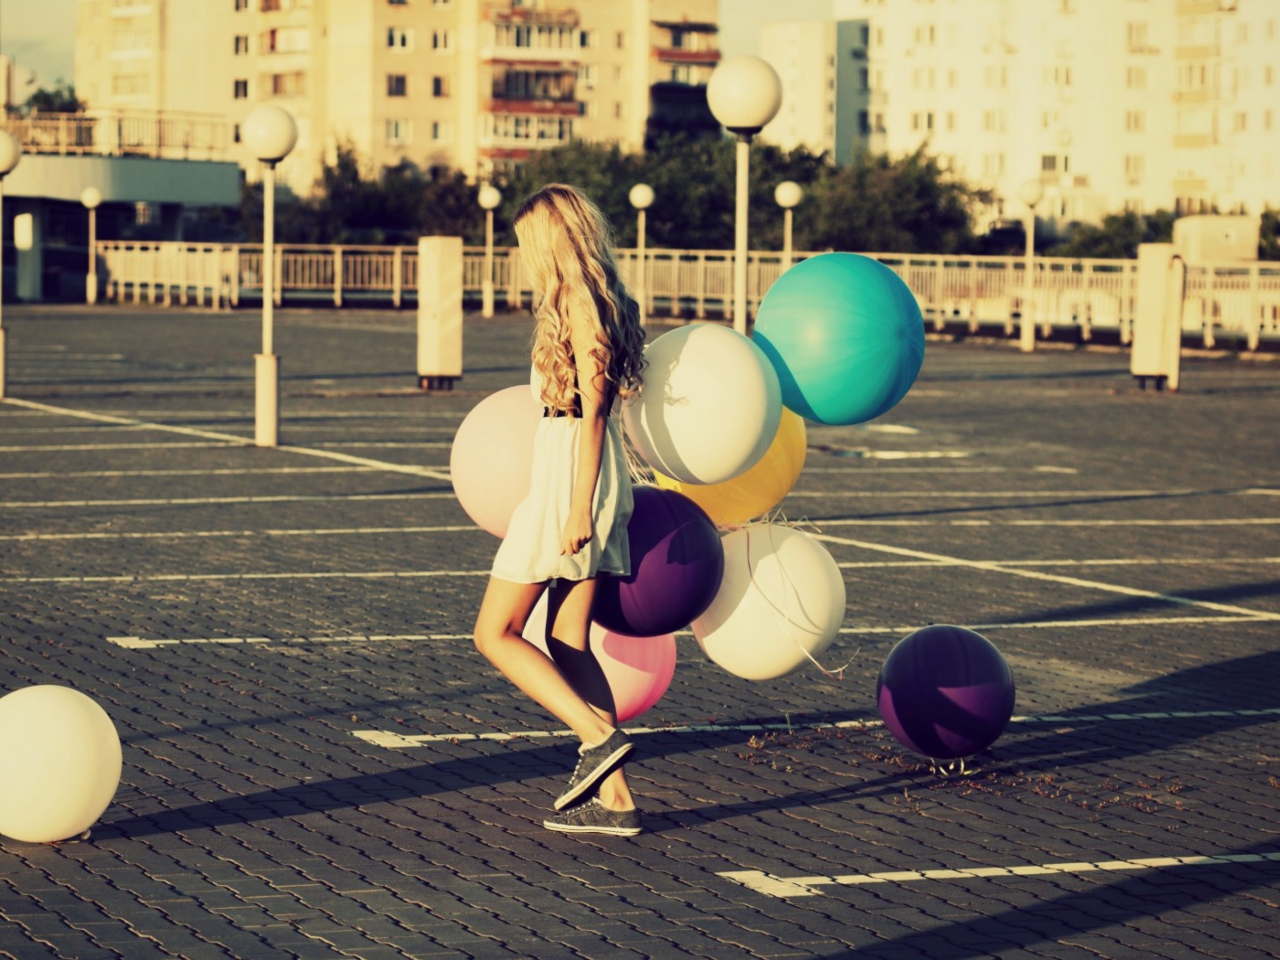 Happy Girl With Colorful Balloons wallpaper 1280x960